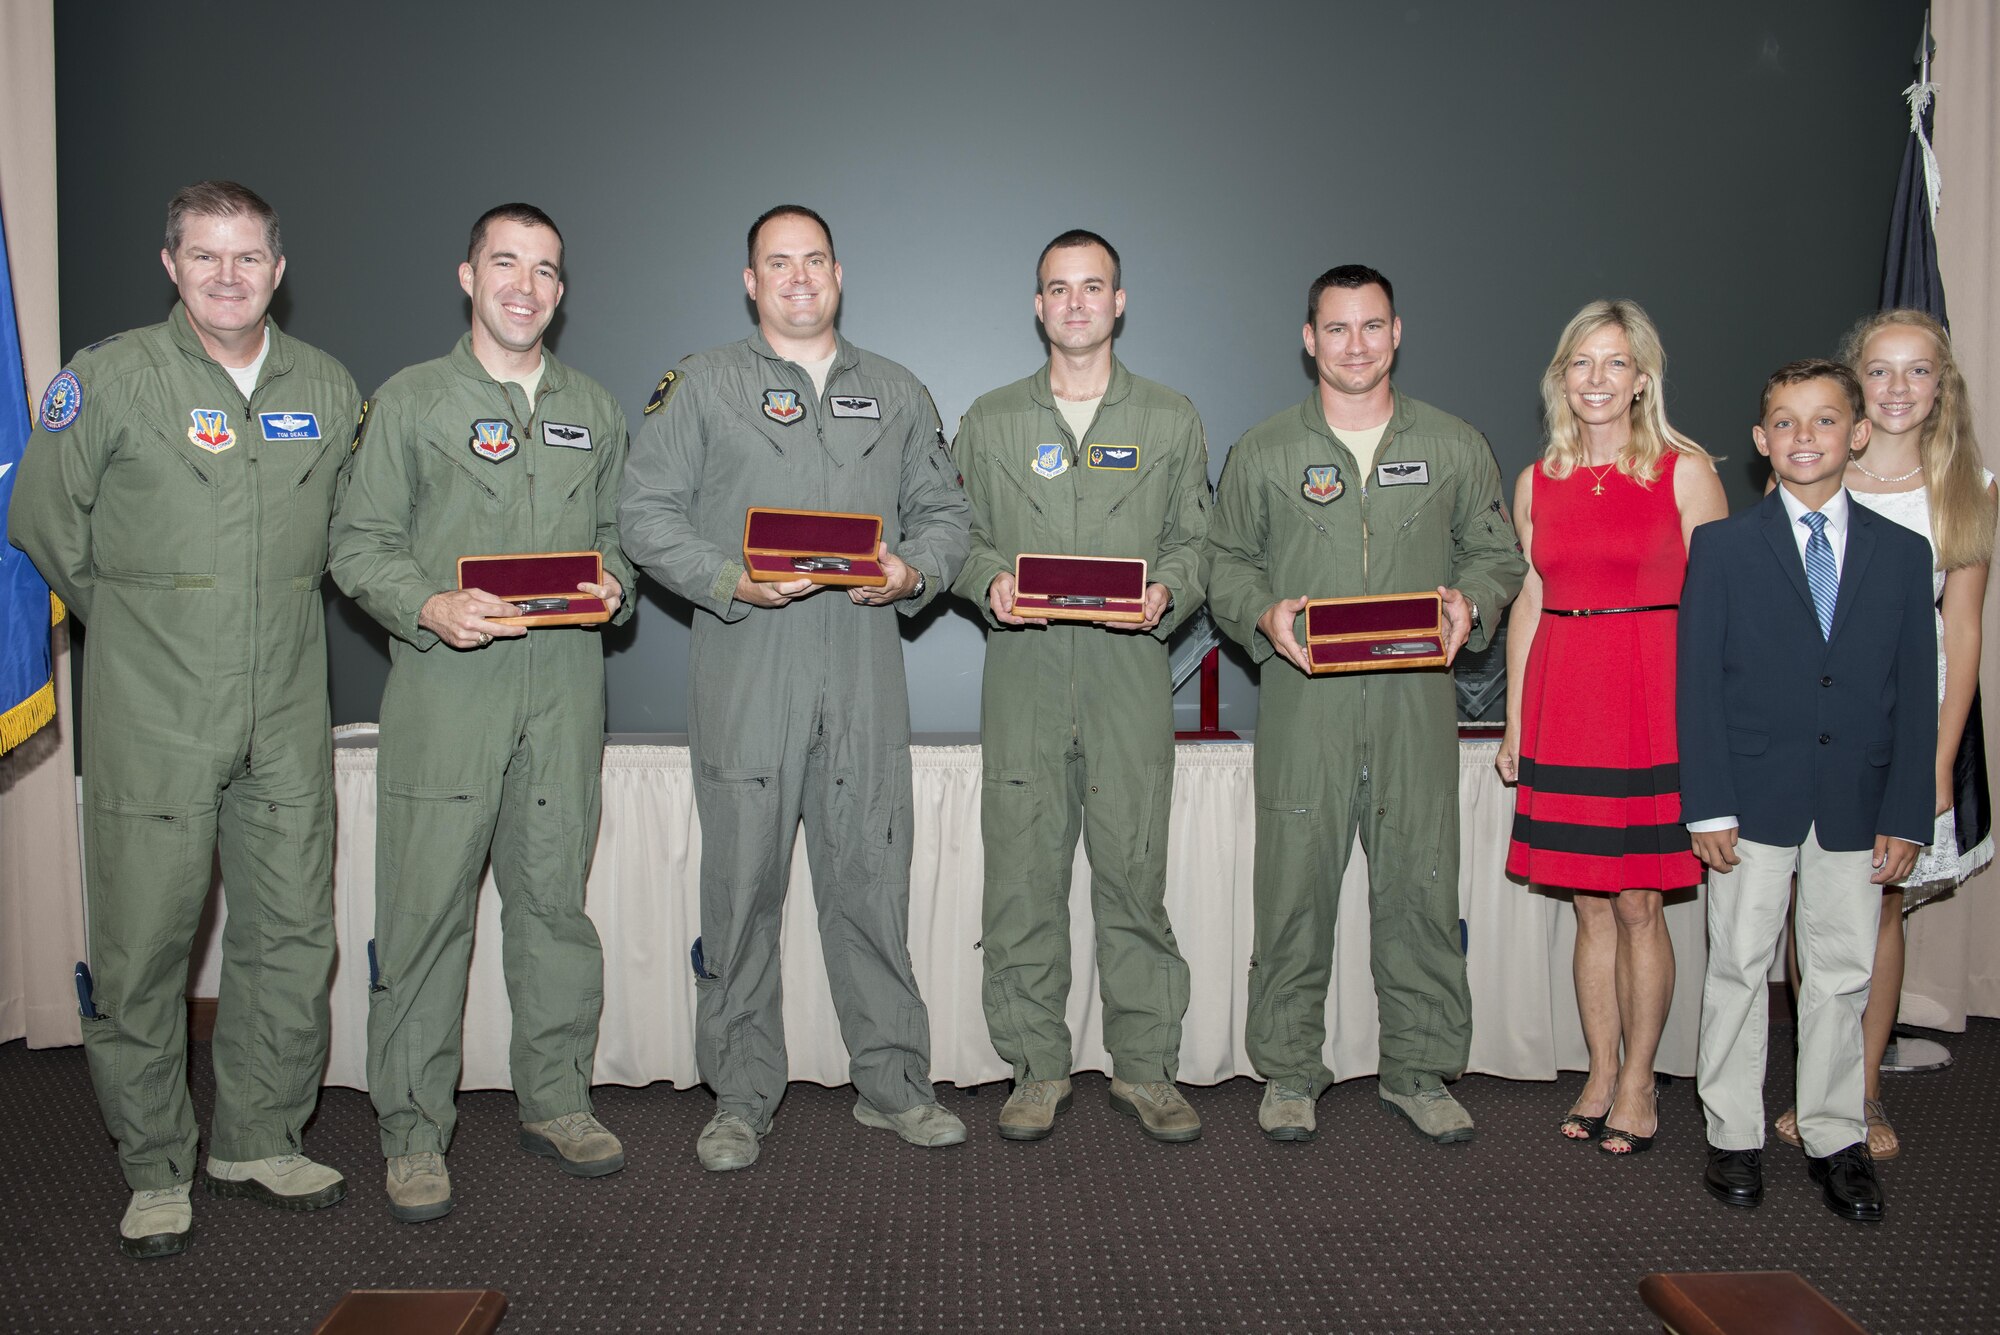 The 2011, 2012, 2014 and 2015 Lt. Col. Anthony C. Shine Fighter Pilot Award winners received engraved knives from Shine’s family during a ceremony at Joint Base Langley-Eustis, Va., Aug. 11, 2016. Maj. Gen. Thomas Deale, left, the Air Combat Command Headquarters director of operations, presented the winners their awards with the Shine family. (U.S. Air Force photo/Staff Sgt. R. Alex Durbin)